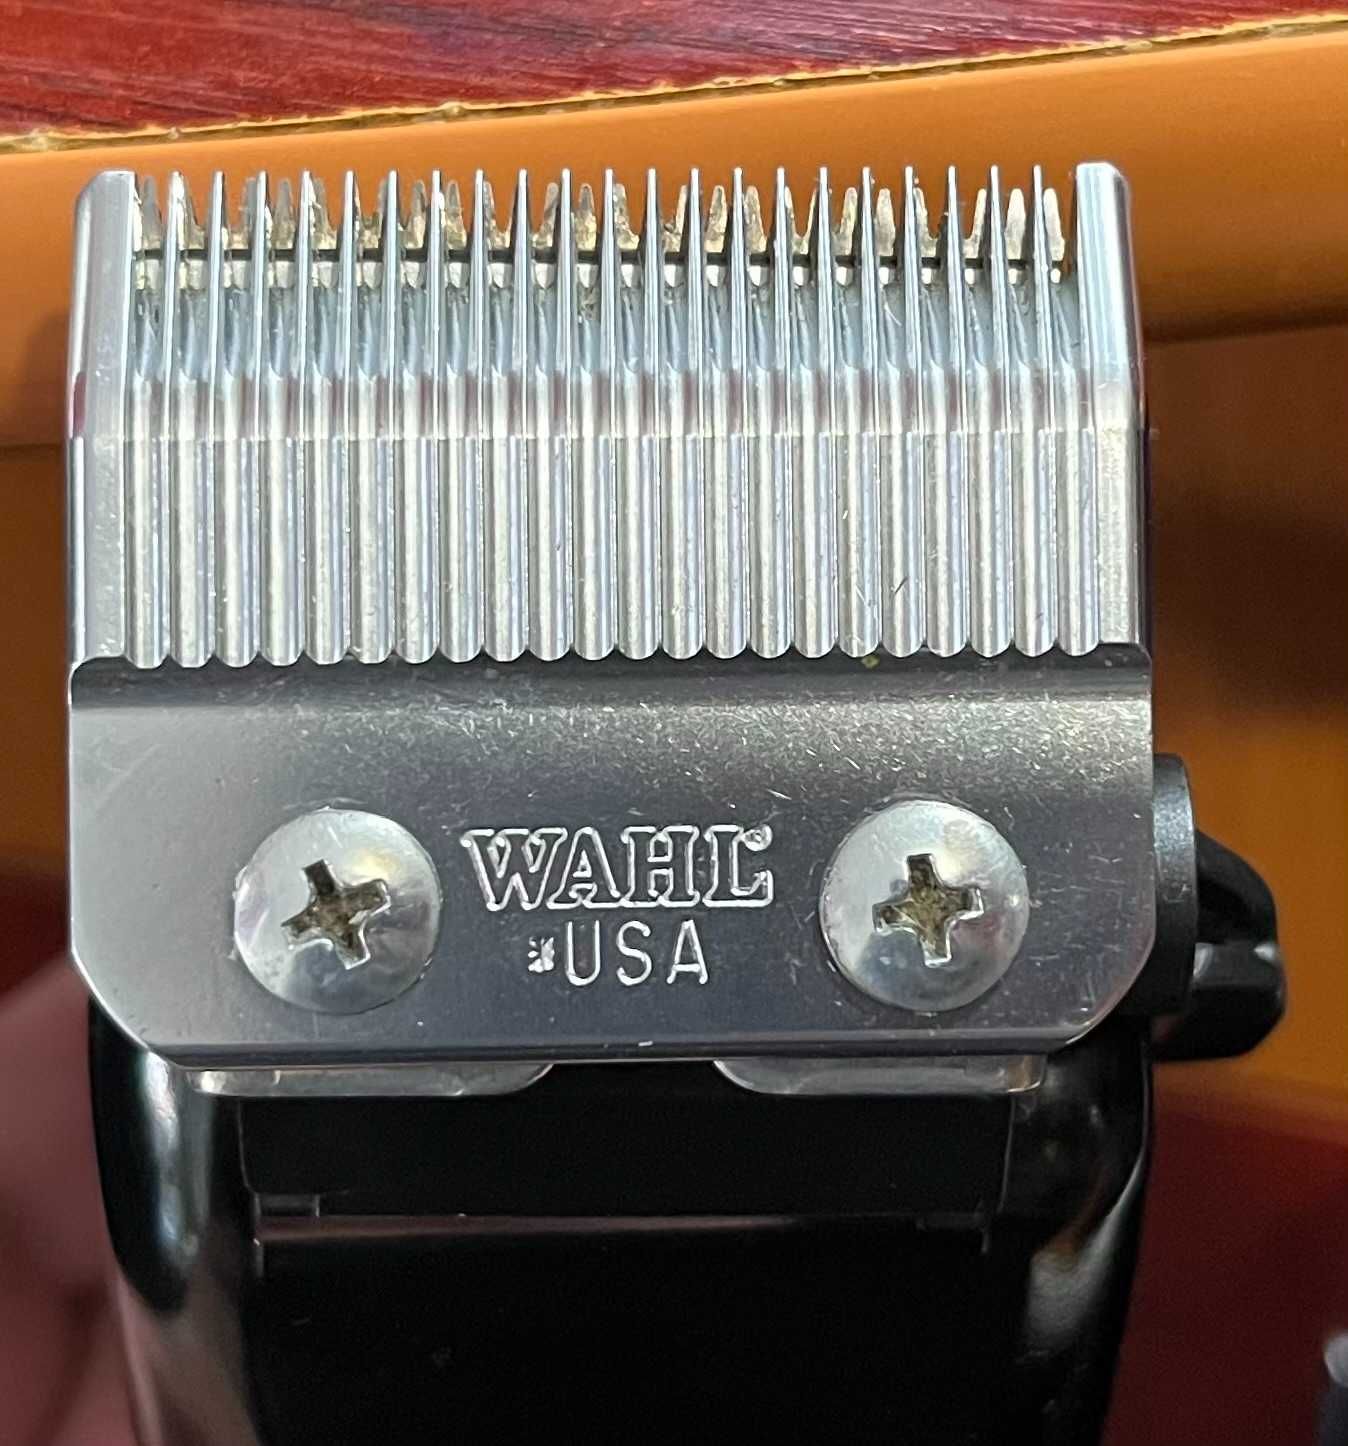 wahl classic series